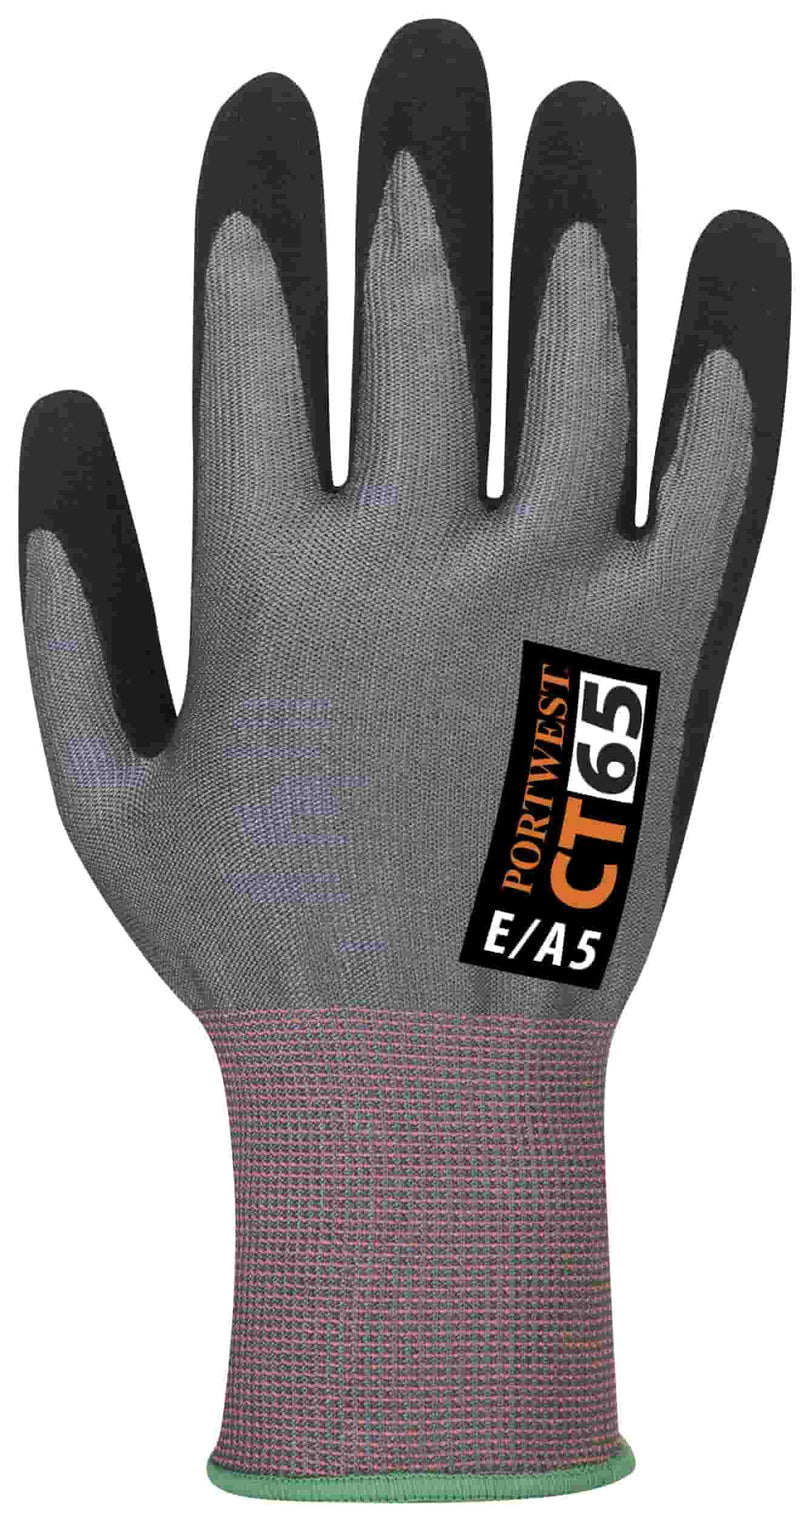 Polyester CT Cut Nitrile Safety Glove